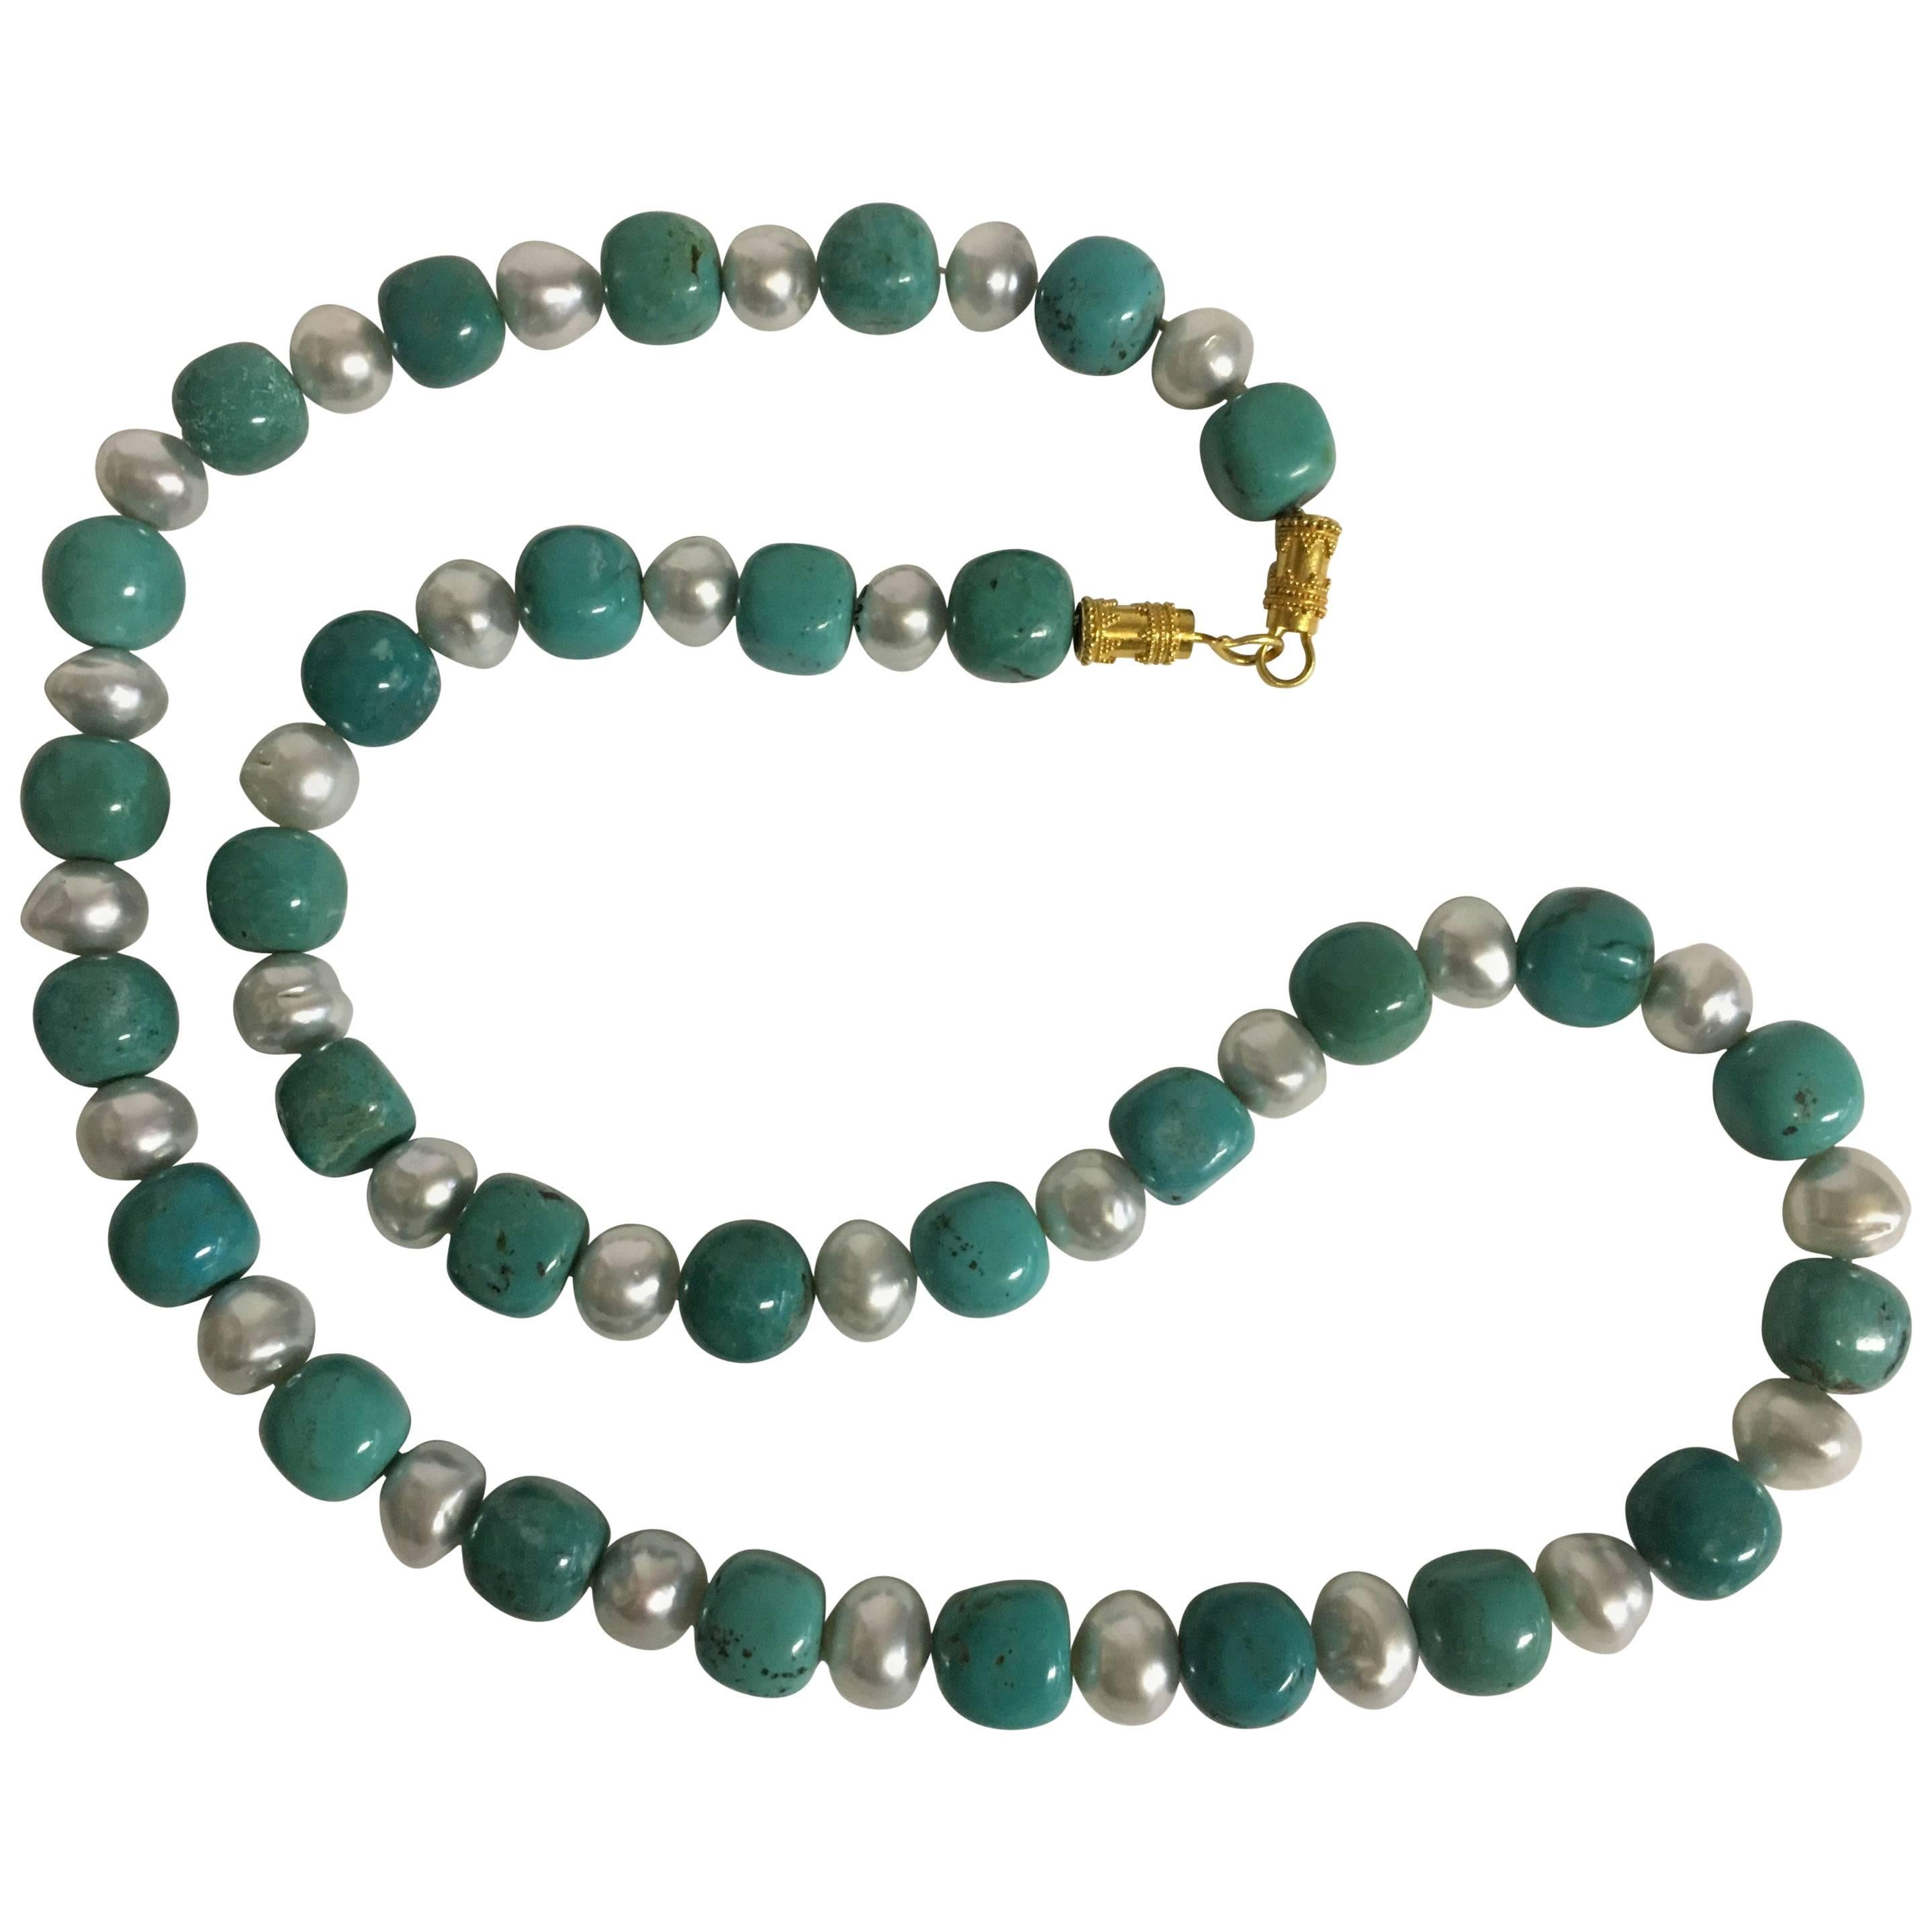 Tibetan Turquoise and South Sea Pearl Necklace